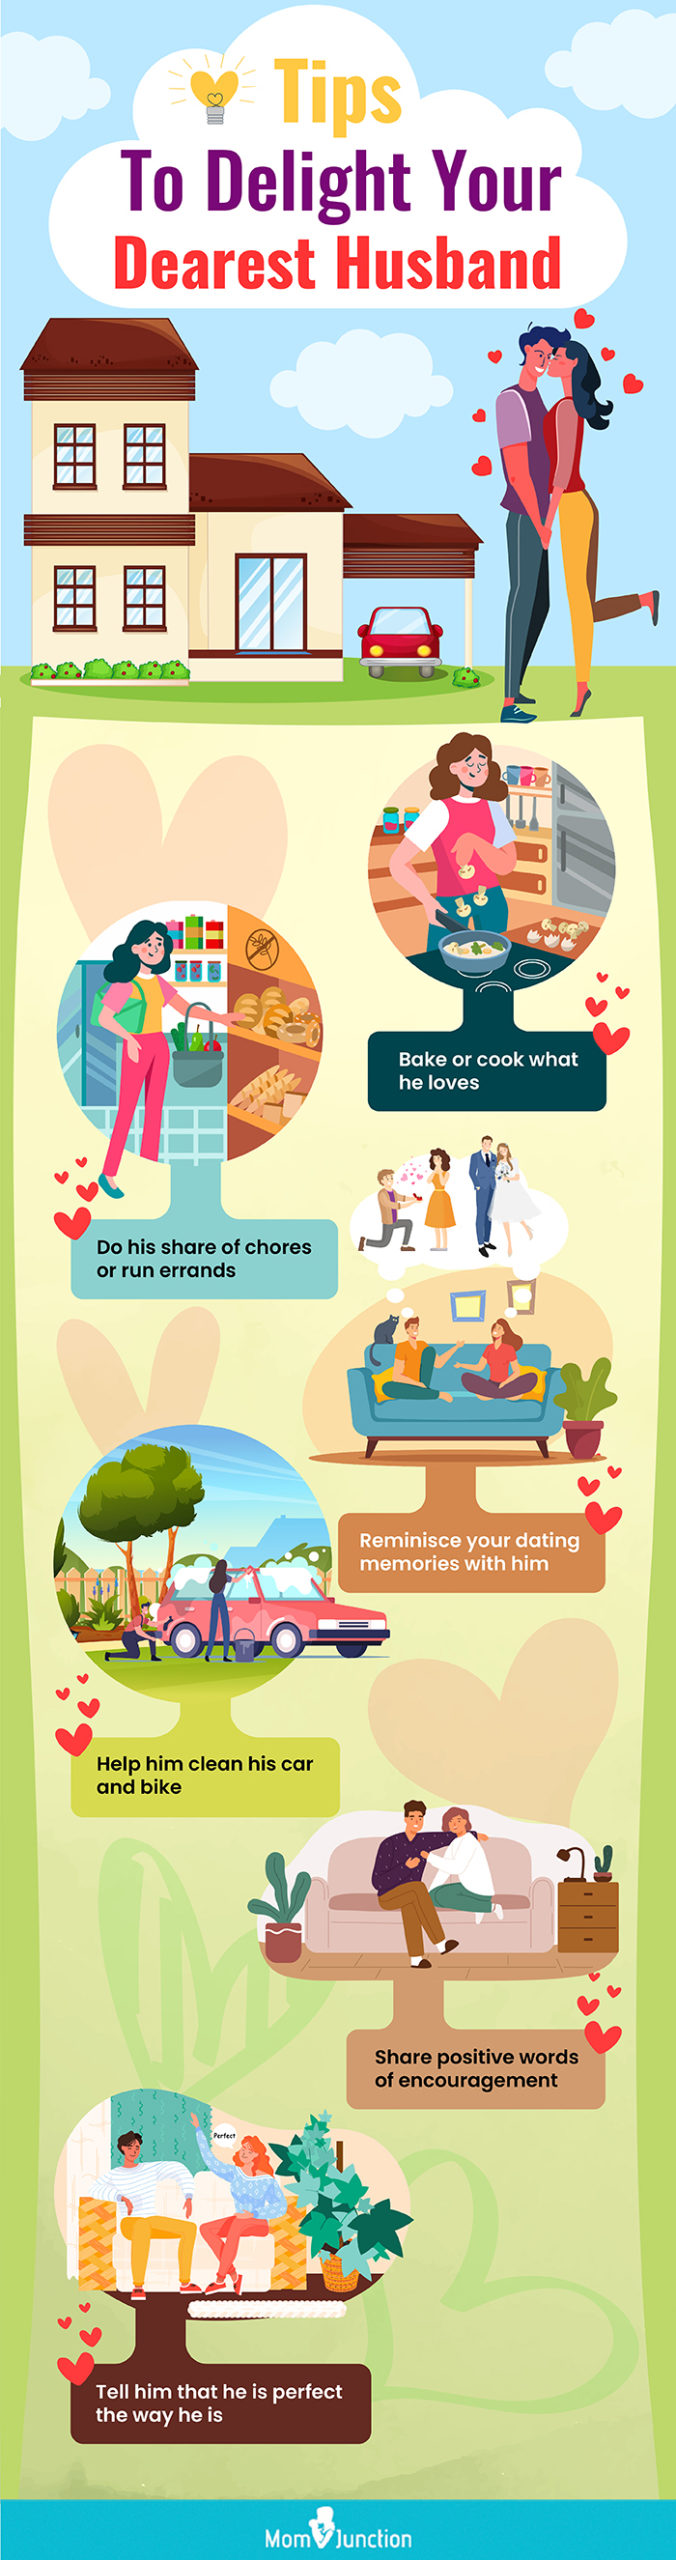 tips to delight your dearest husband [infographic]